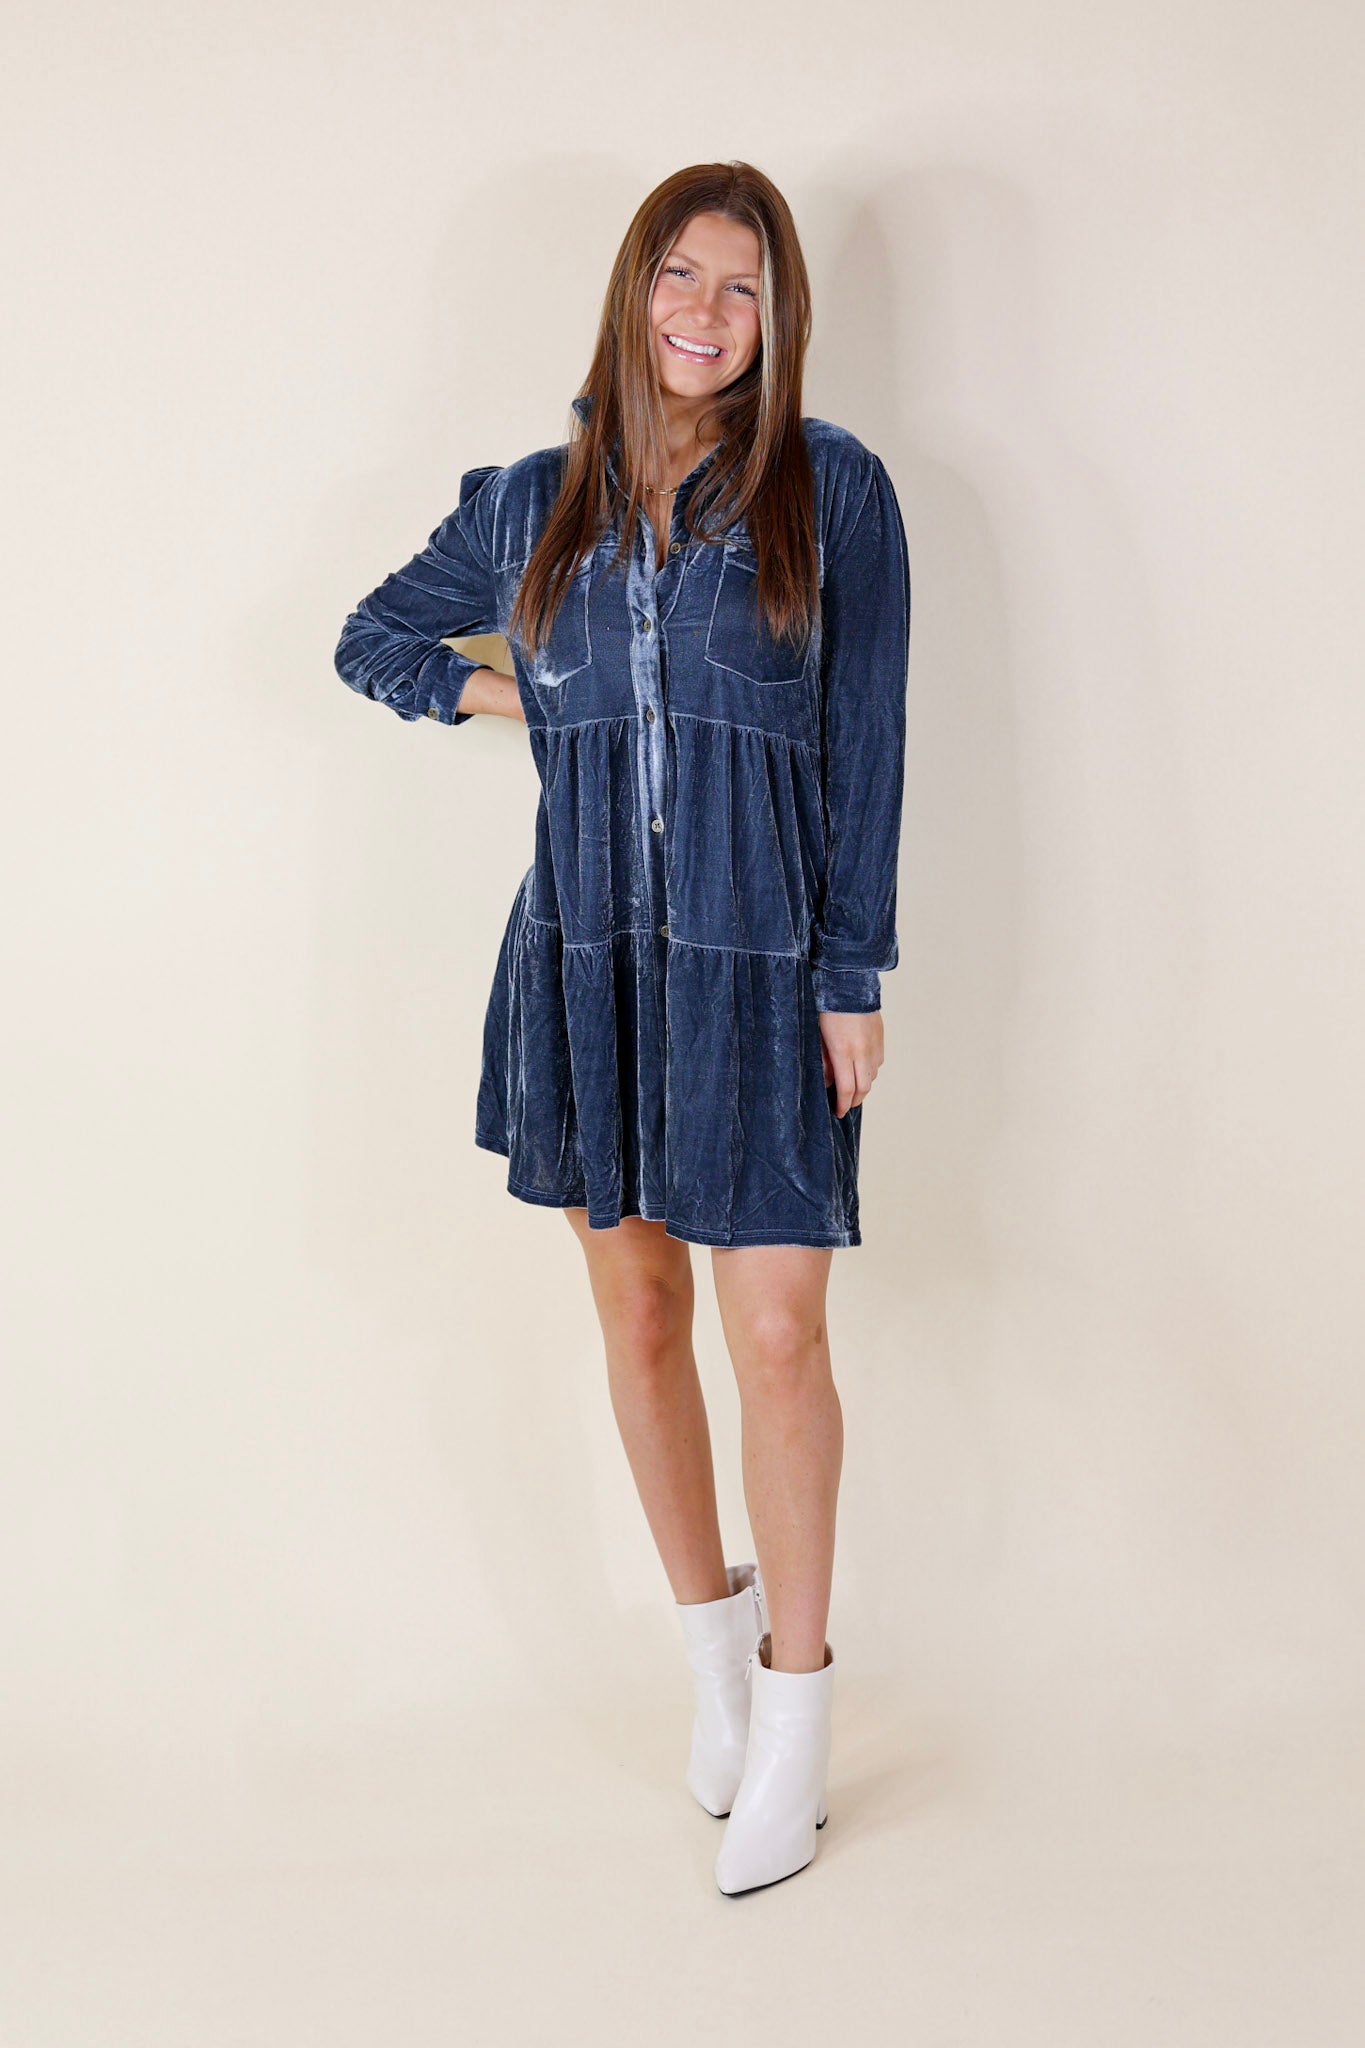 Grateful Gathering Velvet Button Up Dress with Long Sleeves in Steel Blue - Giddy Up Glamour Boutique